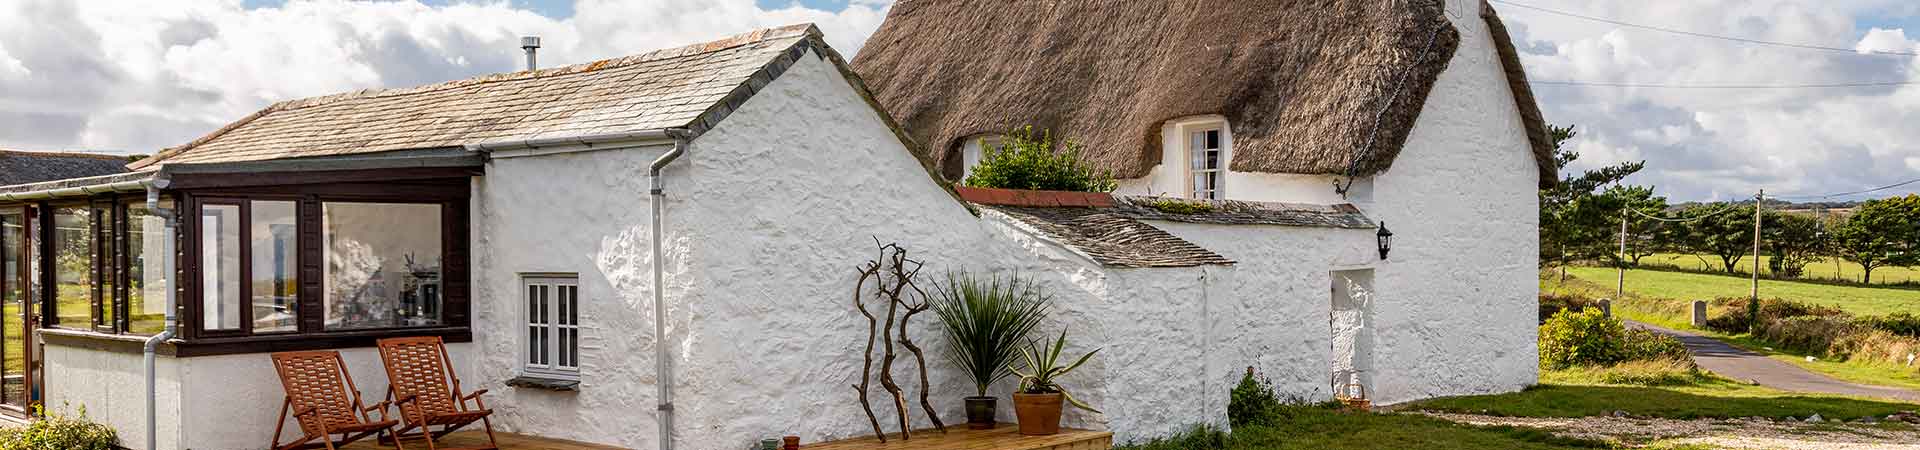 Thatched holiday cottages in Pembrokeshire